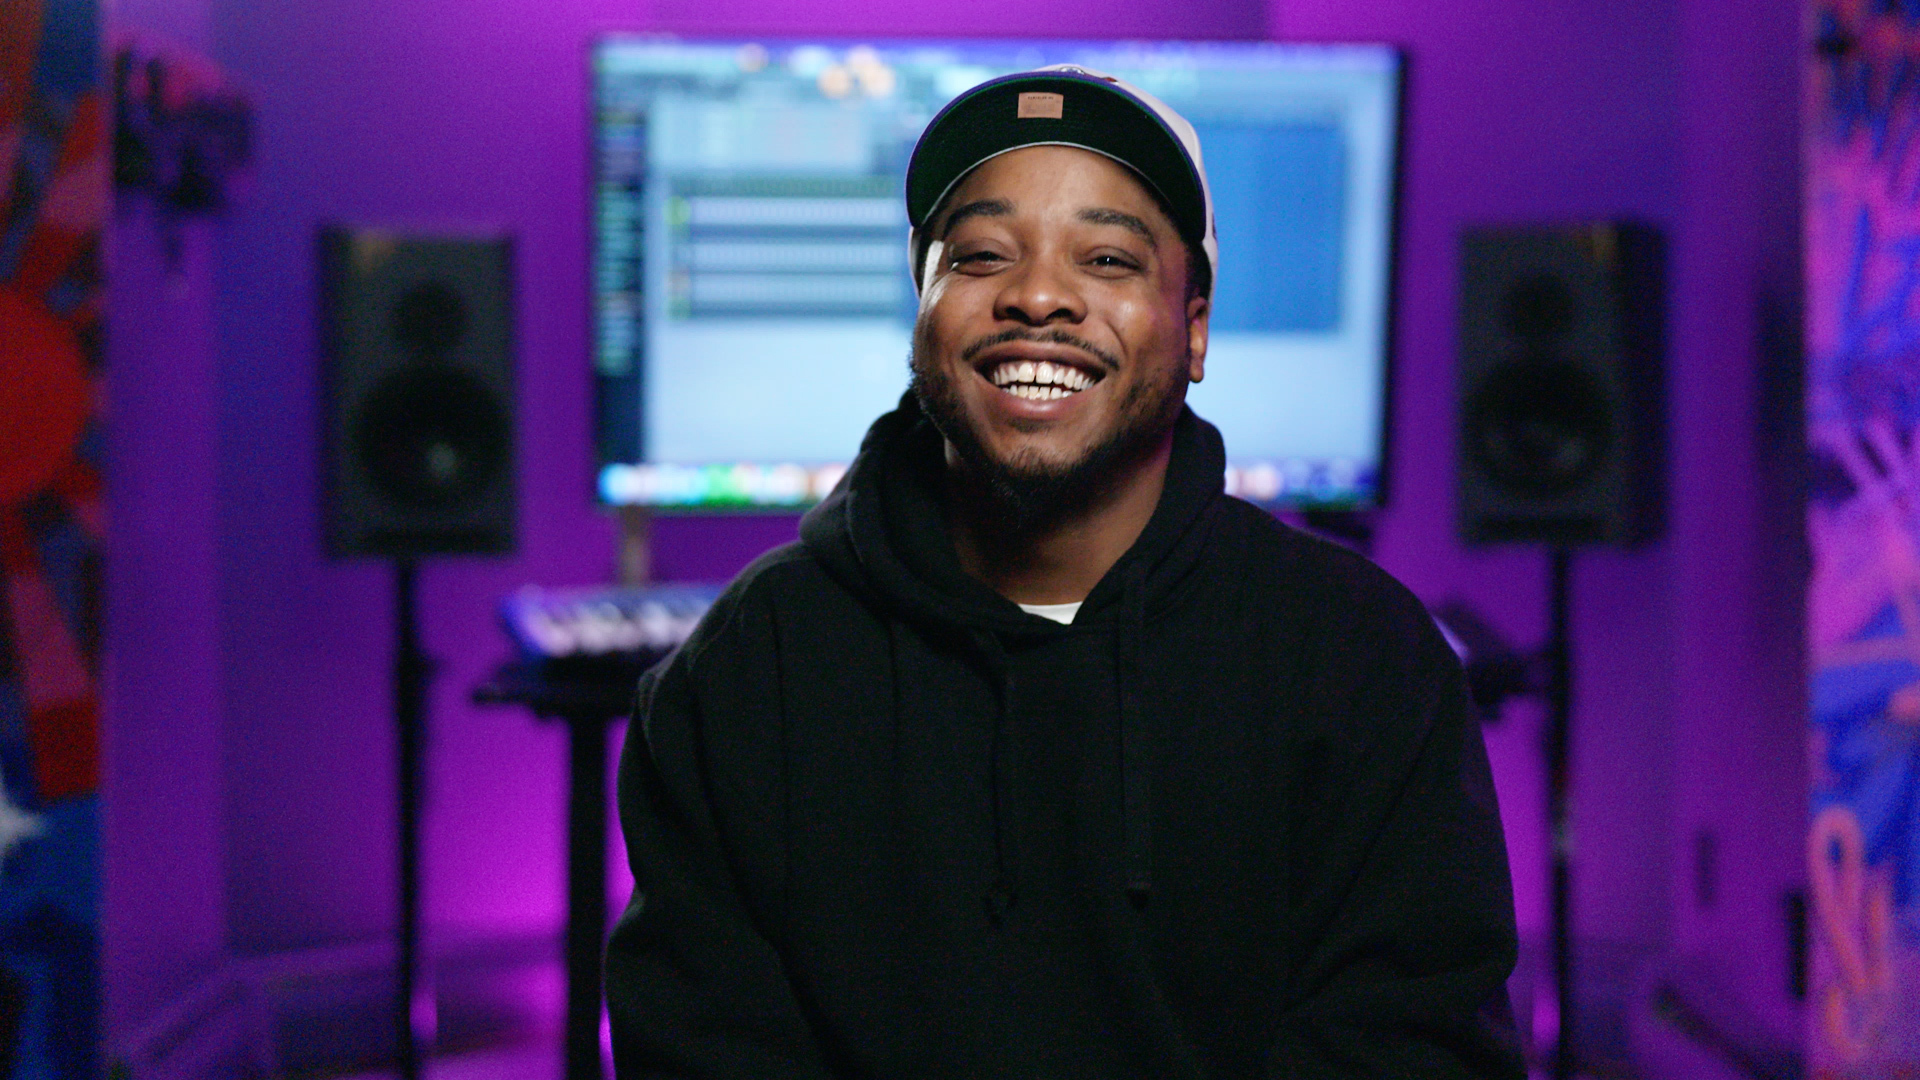 Brockhampton's Dom McLennon Partners With Skillshare To Help The Next Generation Learn Digital Music Production